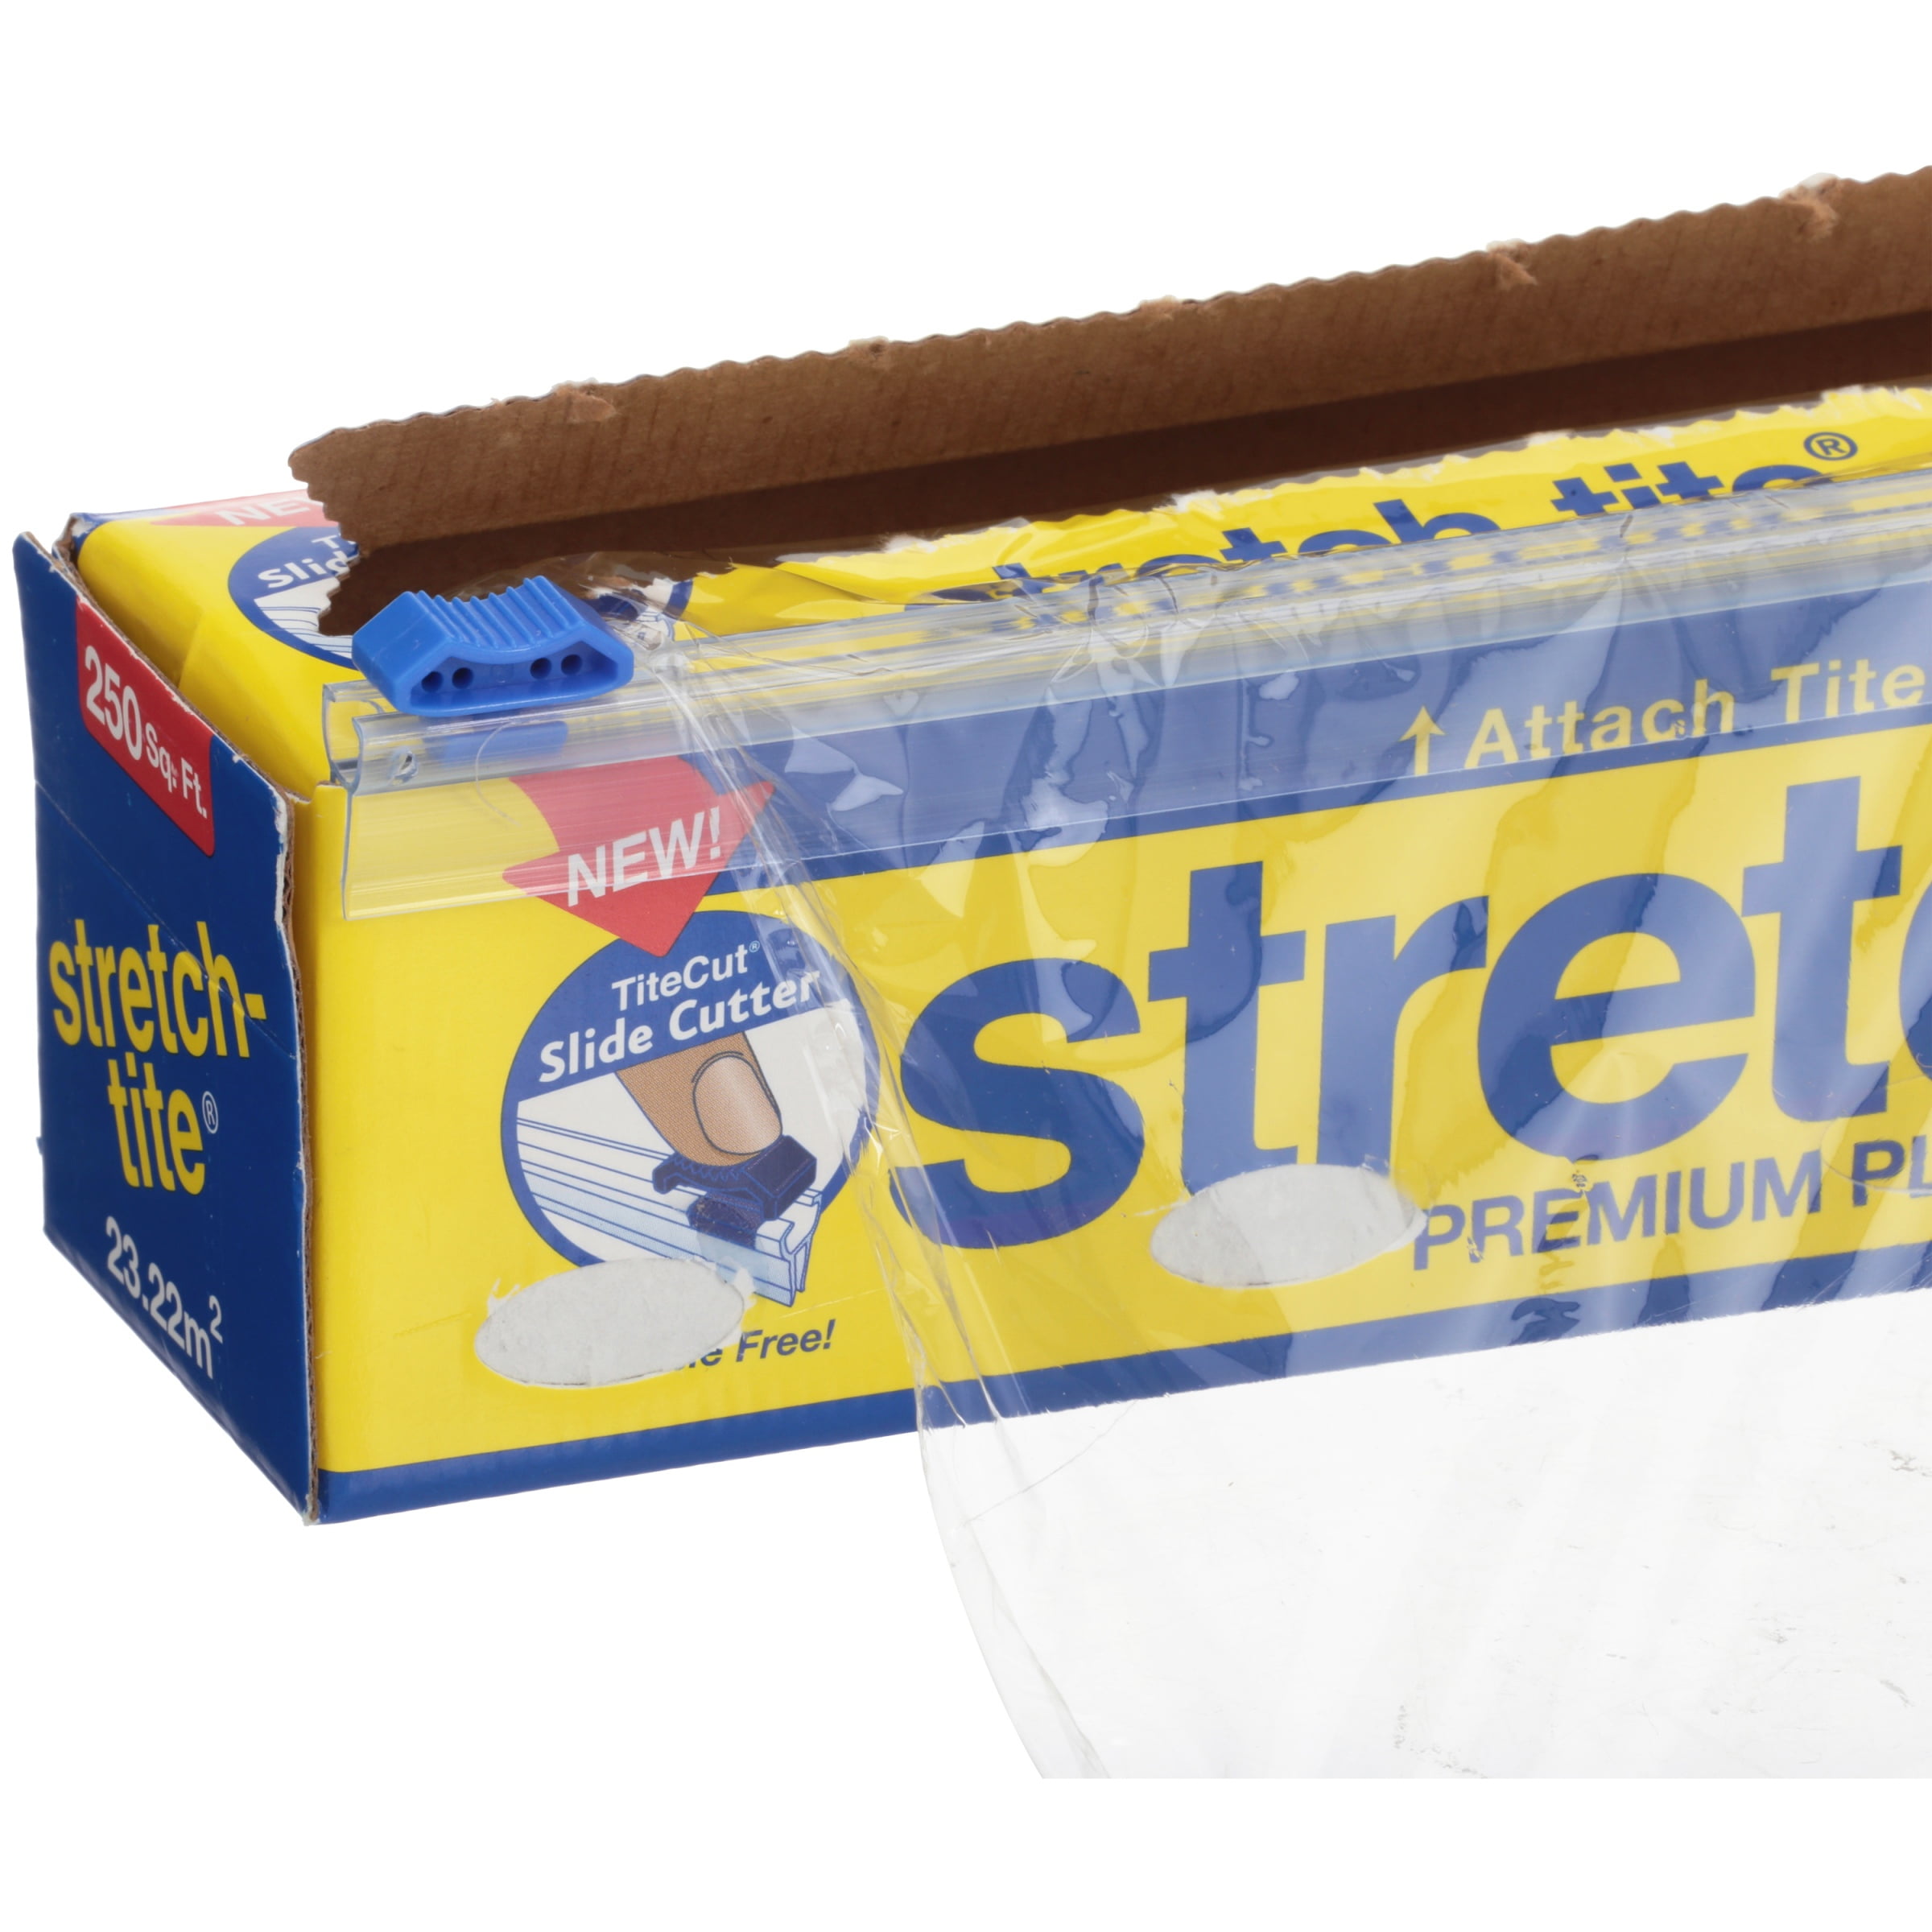 Stretch Tite Premium Food Wrap With Titecut Slide Cutter 12" X 250 SQ FT for sale online 